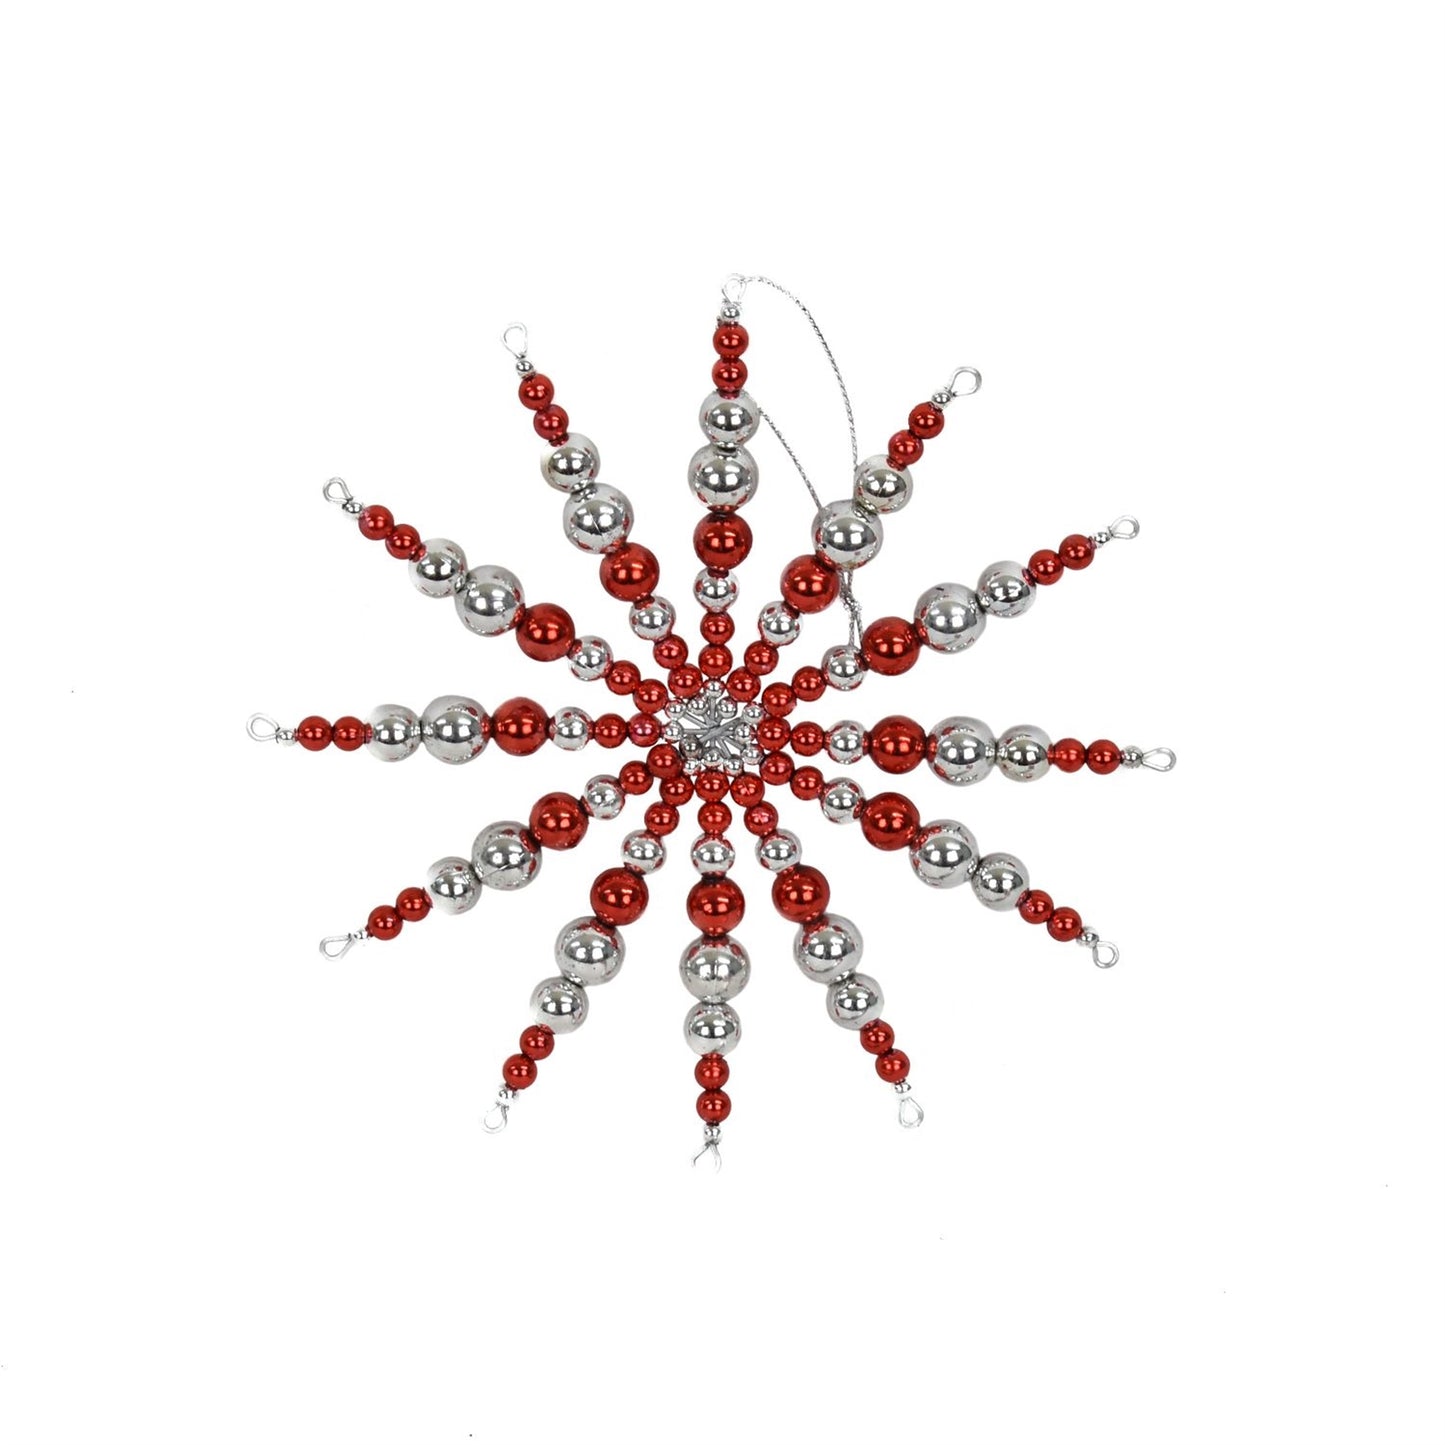 6" Retro Beaded Snowflake Ornament in Red/Silver | YK